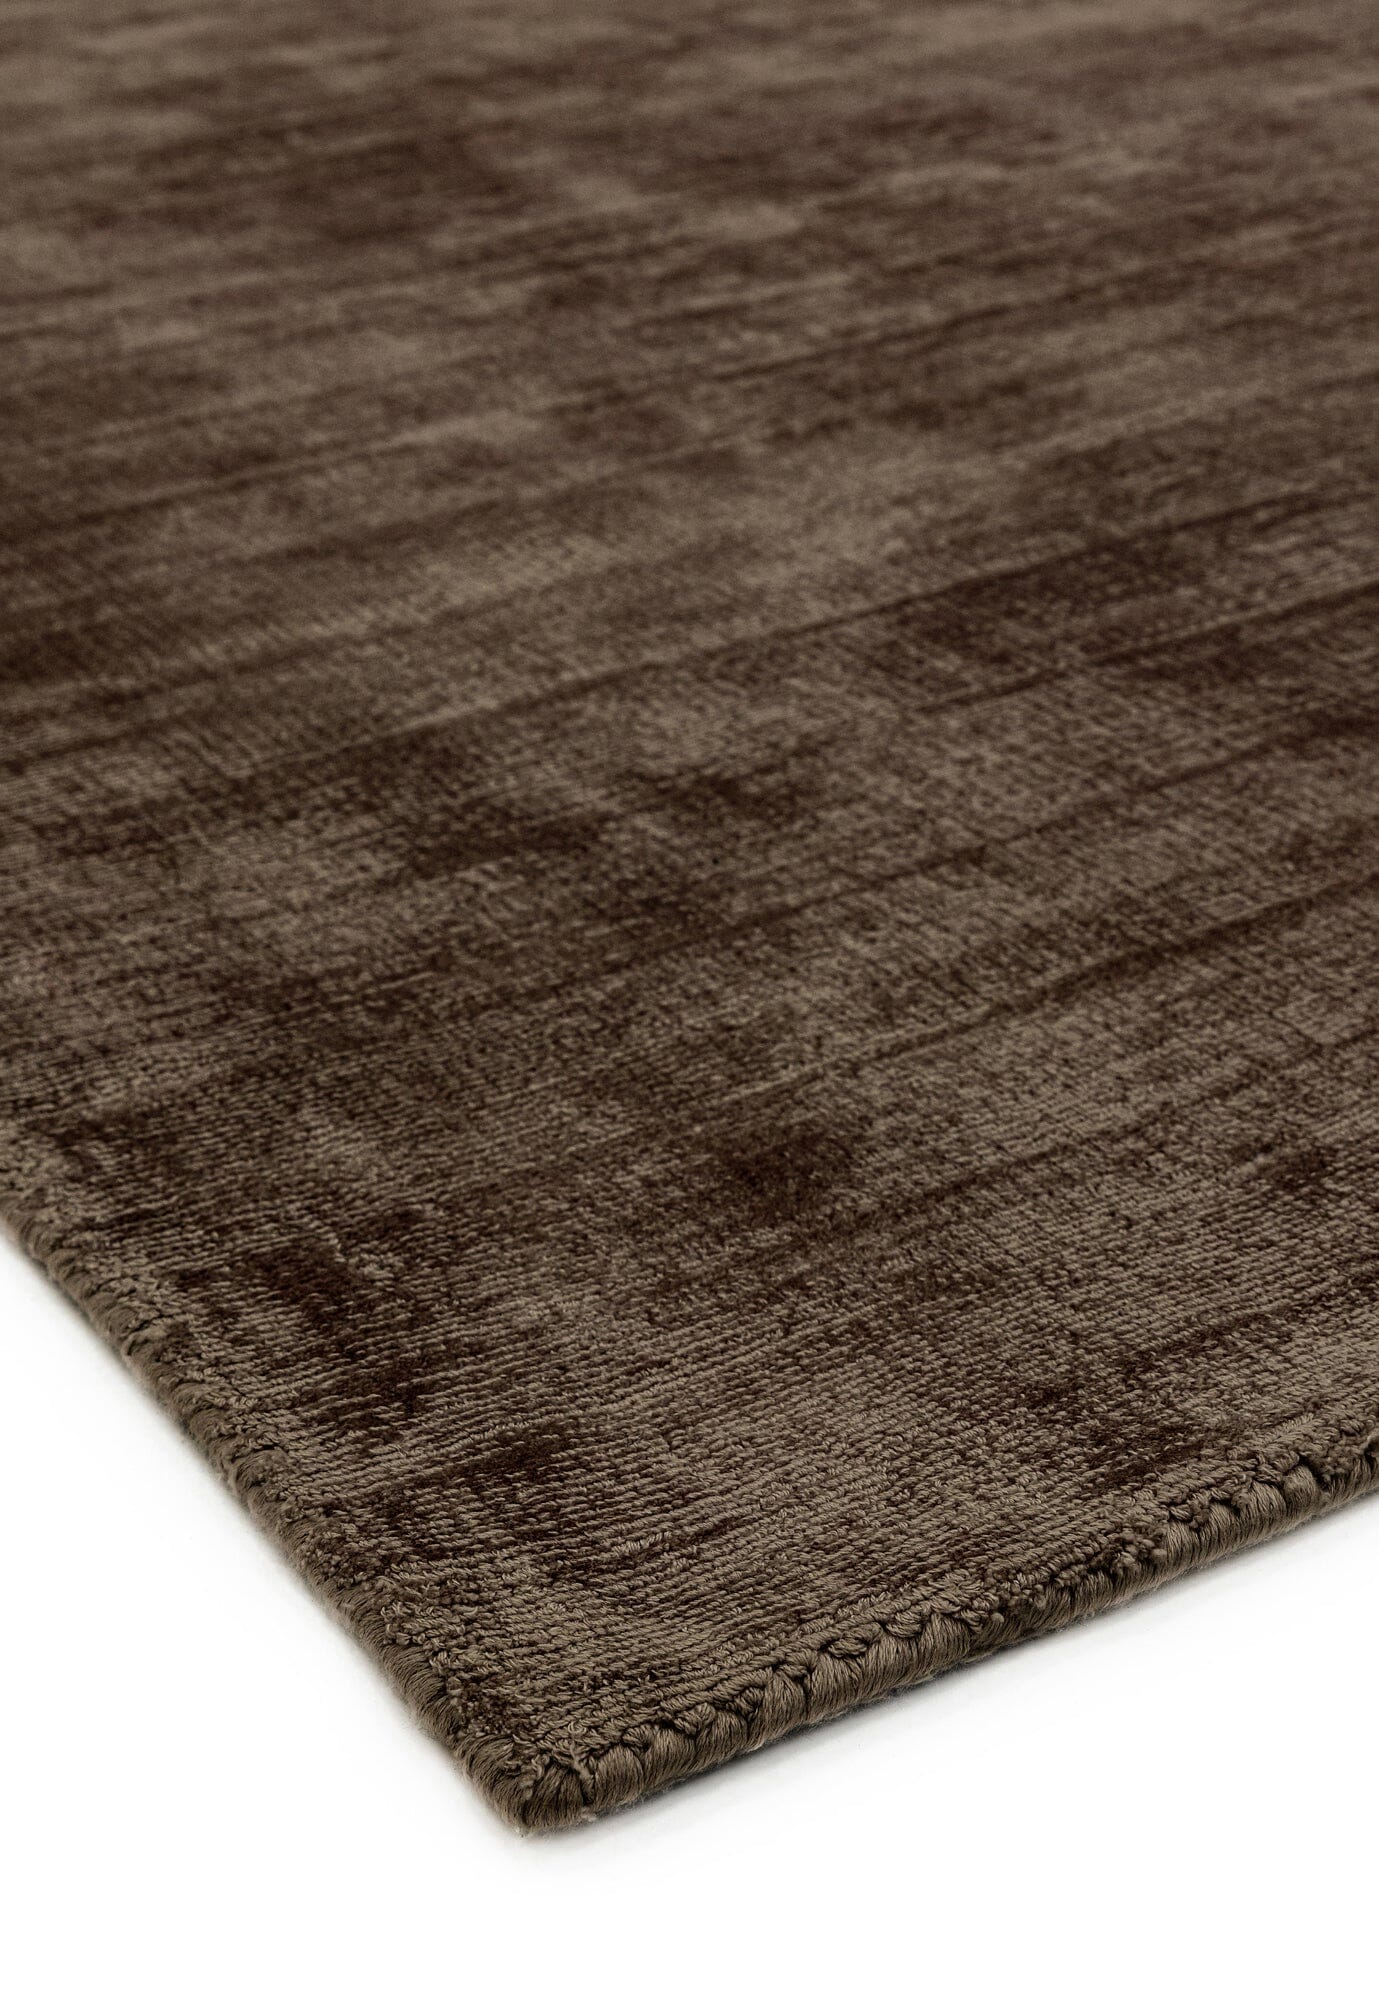  Asiatic Carpets-Asiatic Carpets Blade Hand Woven Rug Chocolate - 240 x 340cm-Brown 573 